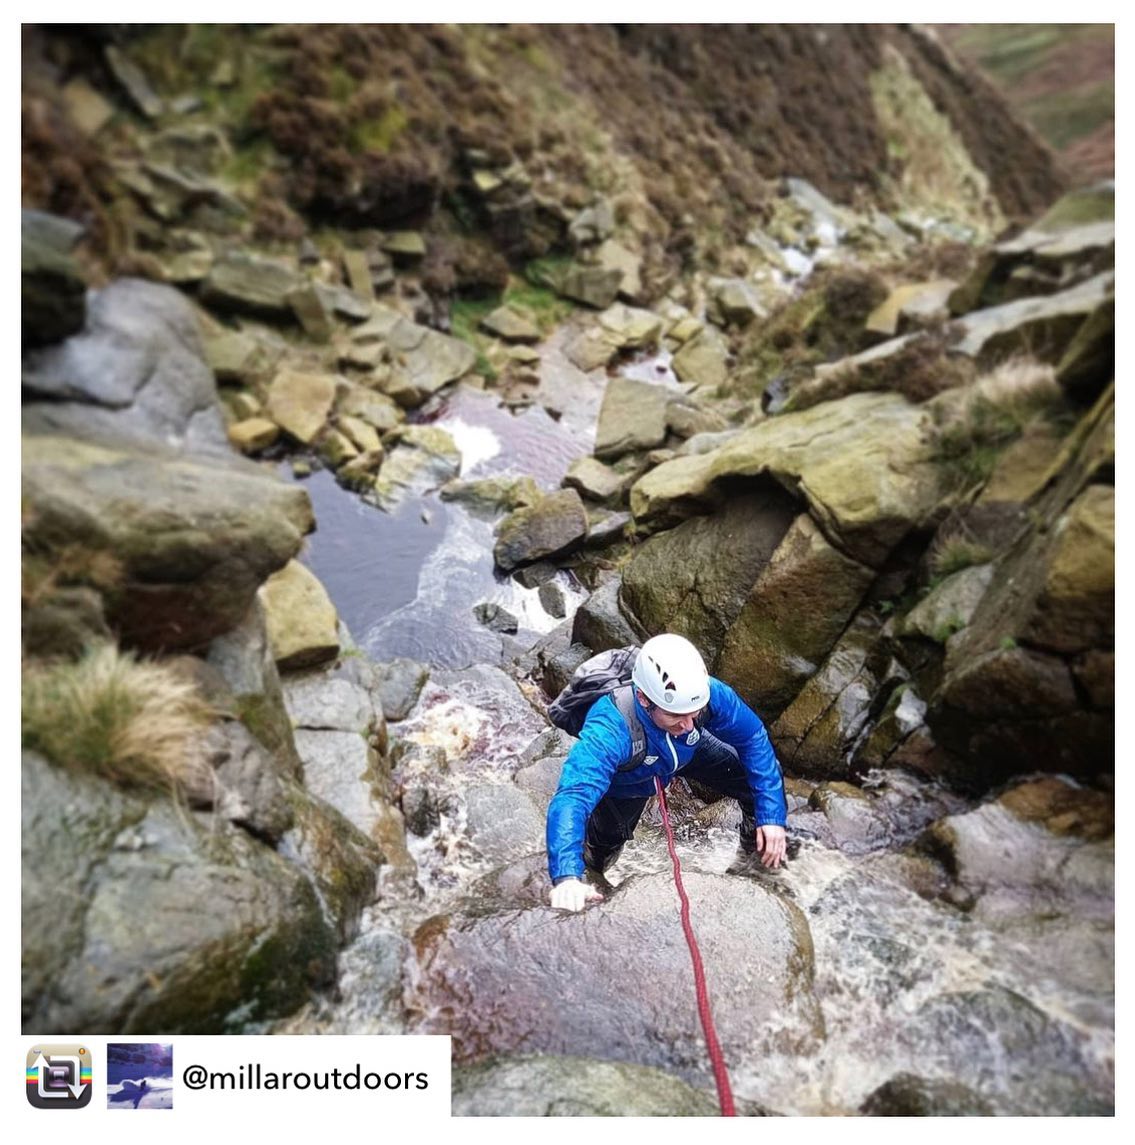 Repost from @millaroutdoors mountain adventure scramble at Crowden Clough on Saturday, all bookings are available through the link in our bio #wildernessdevelopment ⛰🥾⛰

Saturdays scrambling up Kinder's cloughs are Saturdays well spent. 

The days are getting shorter but you can still cram in a lot of adventure before dark.

#hiking #scramble #scrambling #hillwalking #randonnée #walking #hills #climbing #outdoors #outdoorlife #peakdistrict #peakdistrictnationalpark #kinderscout #crowdenclough #derbyshire #outdoorfitness #fitness #dailyexercise